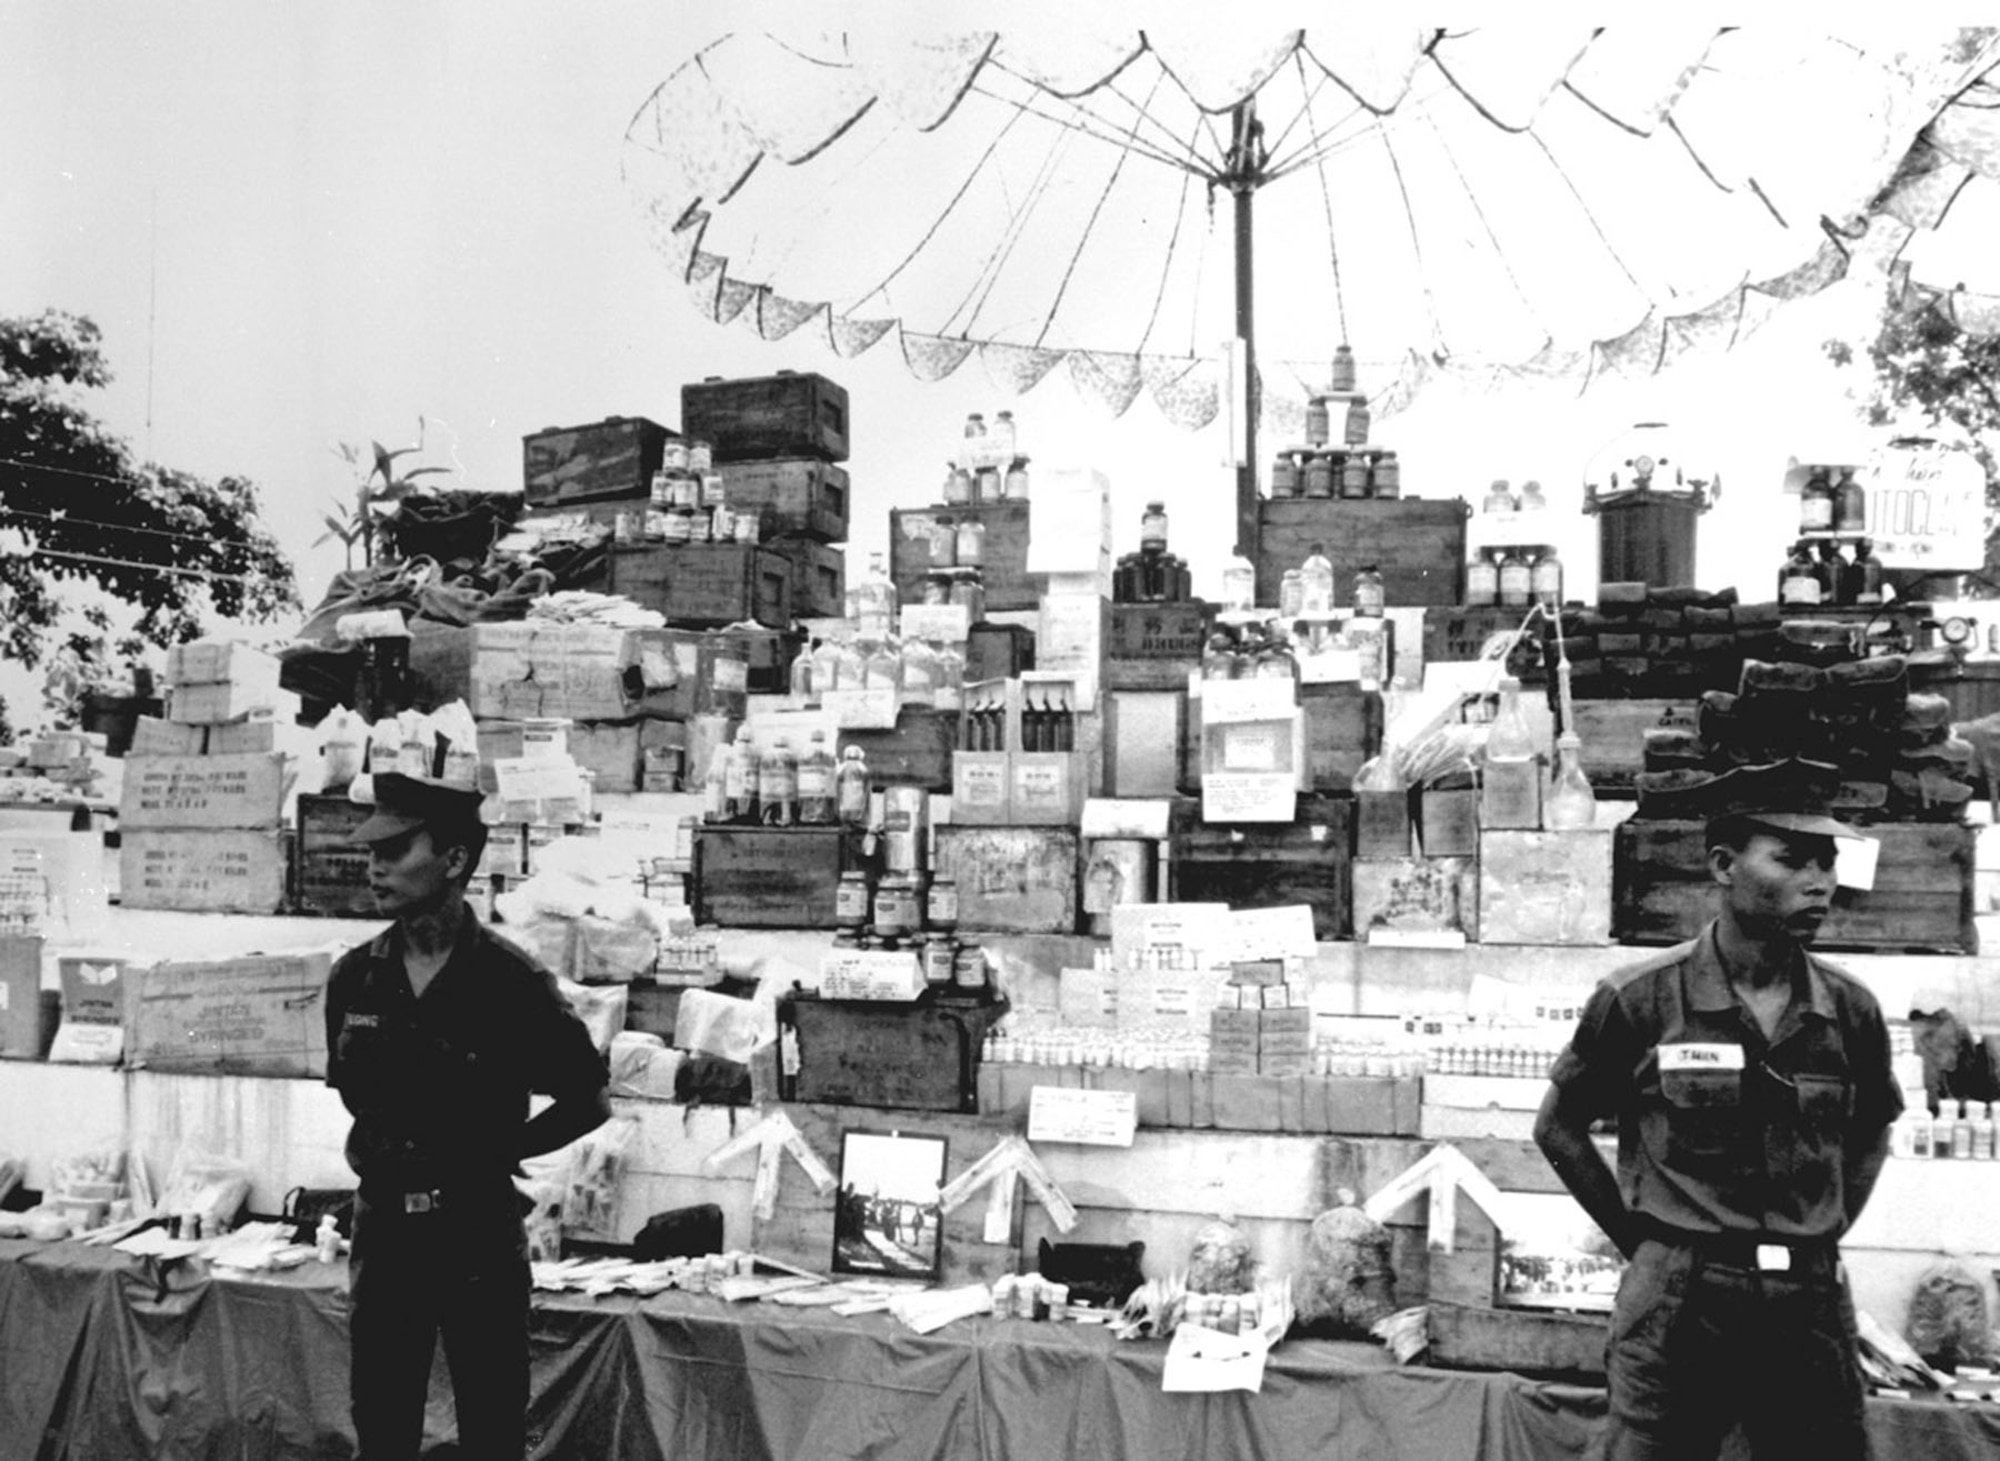 Supplies captured in the effort to eliminate sanctuaries. (U.S. Air Force photo)